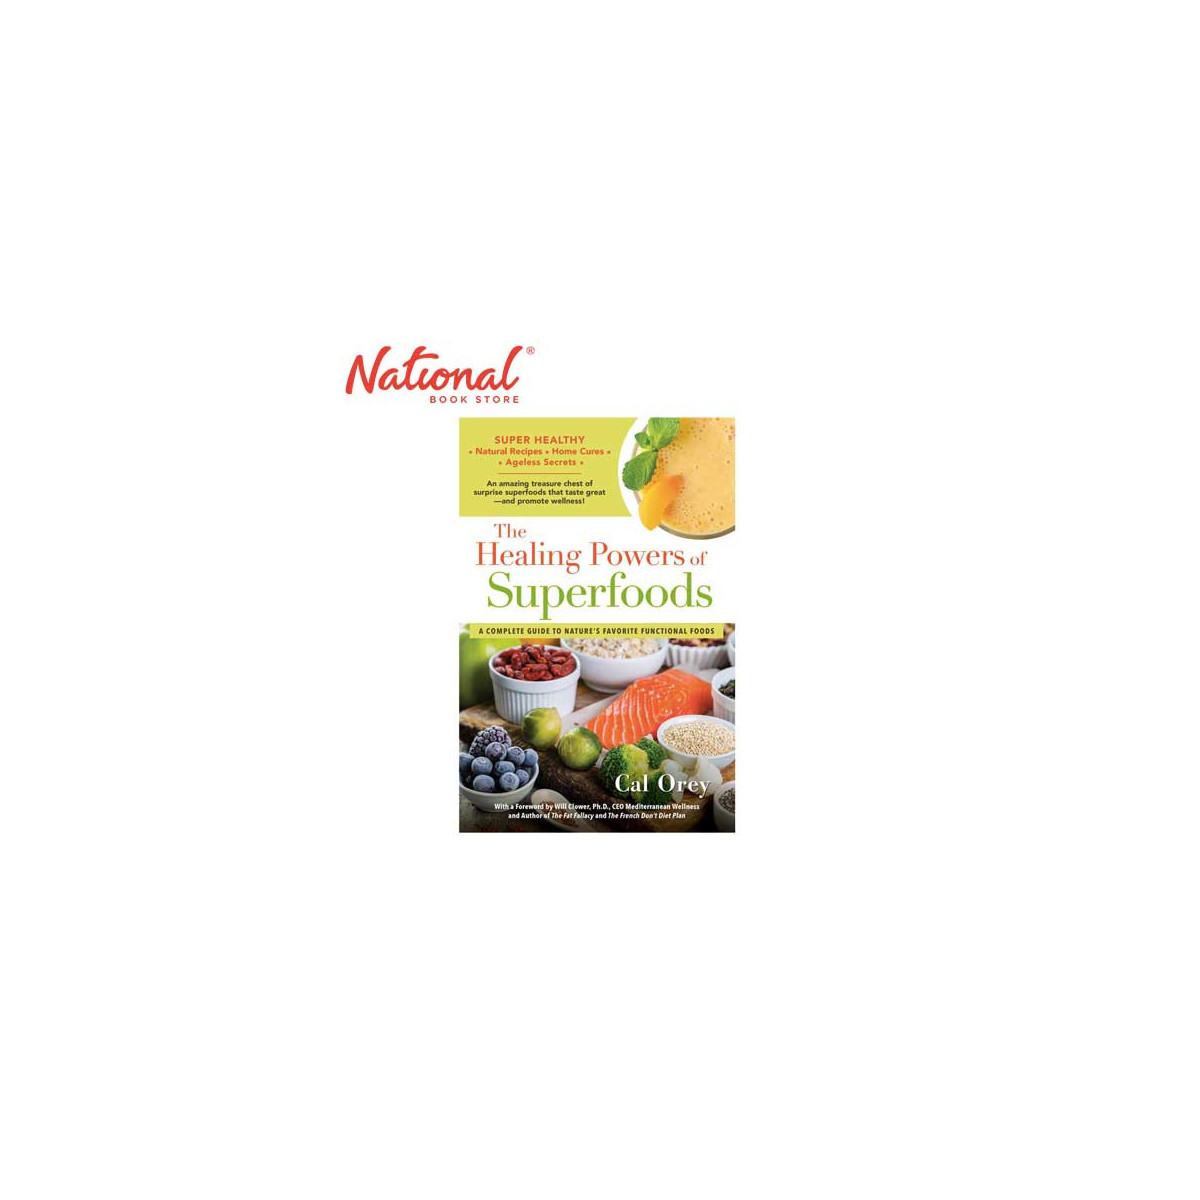 The Healing Powers of Superfoods by Cal Orey - Trade Paperback - Health & Fitness